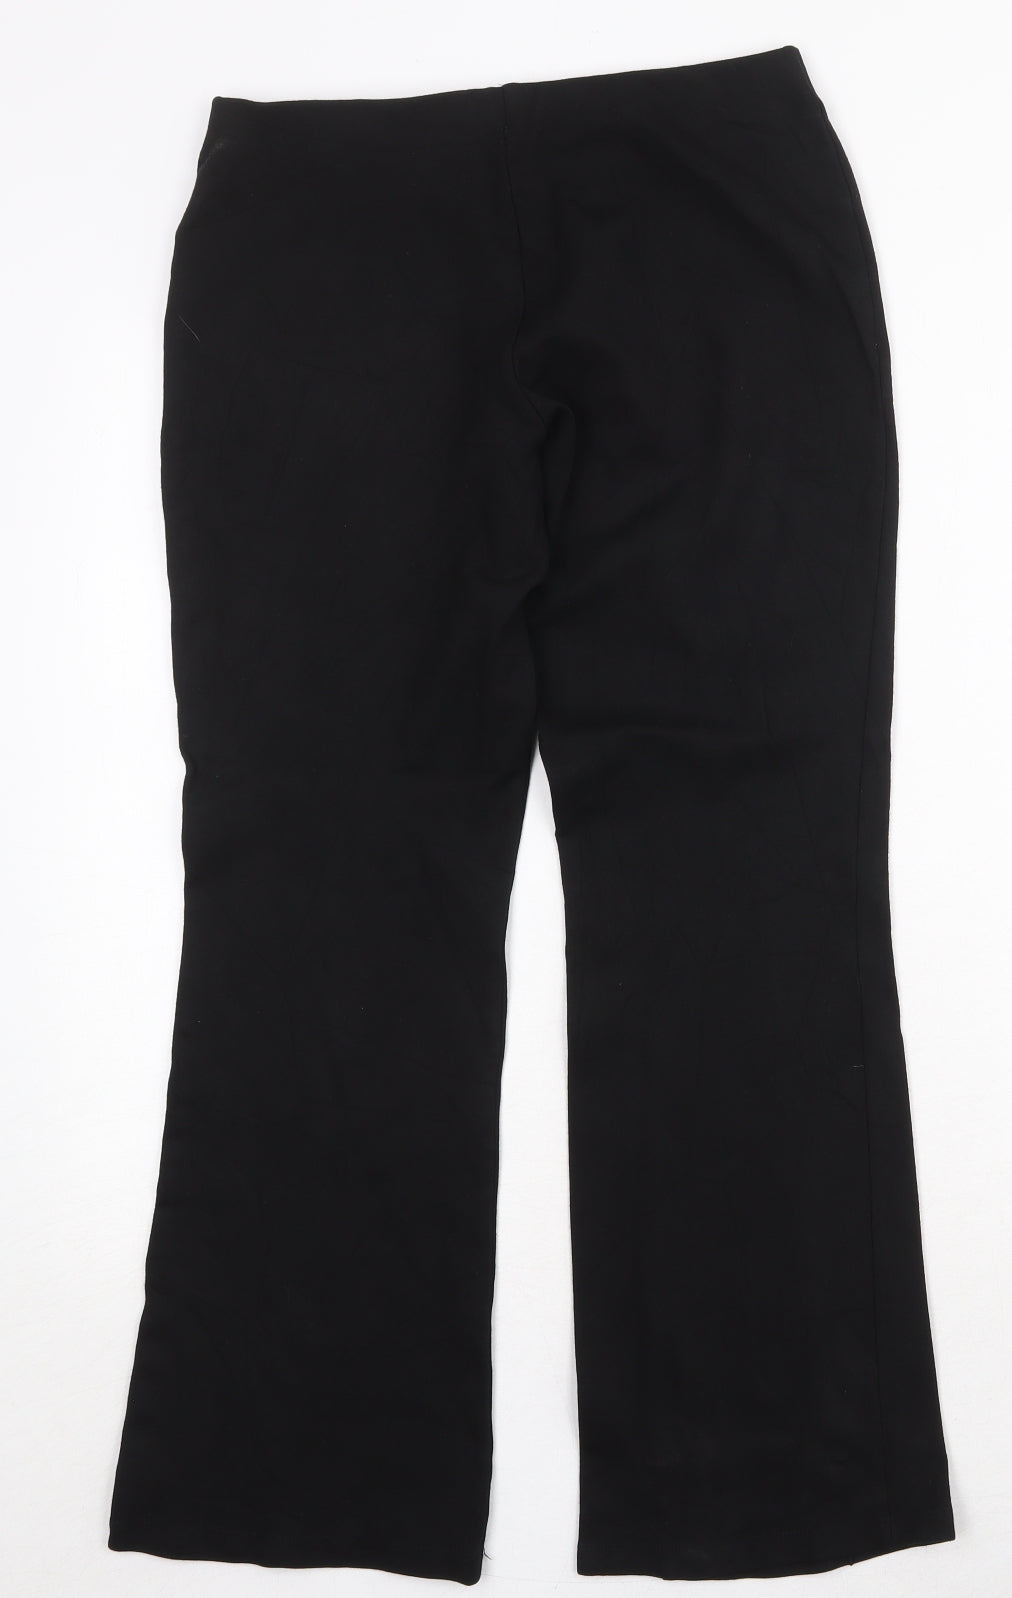 Marks and Spencer Womens Black Viscose Trousers Size 12 Regular